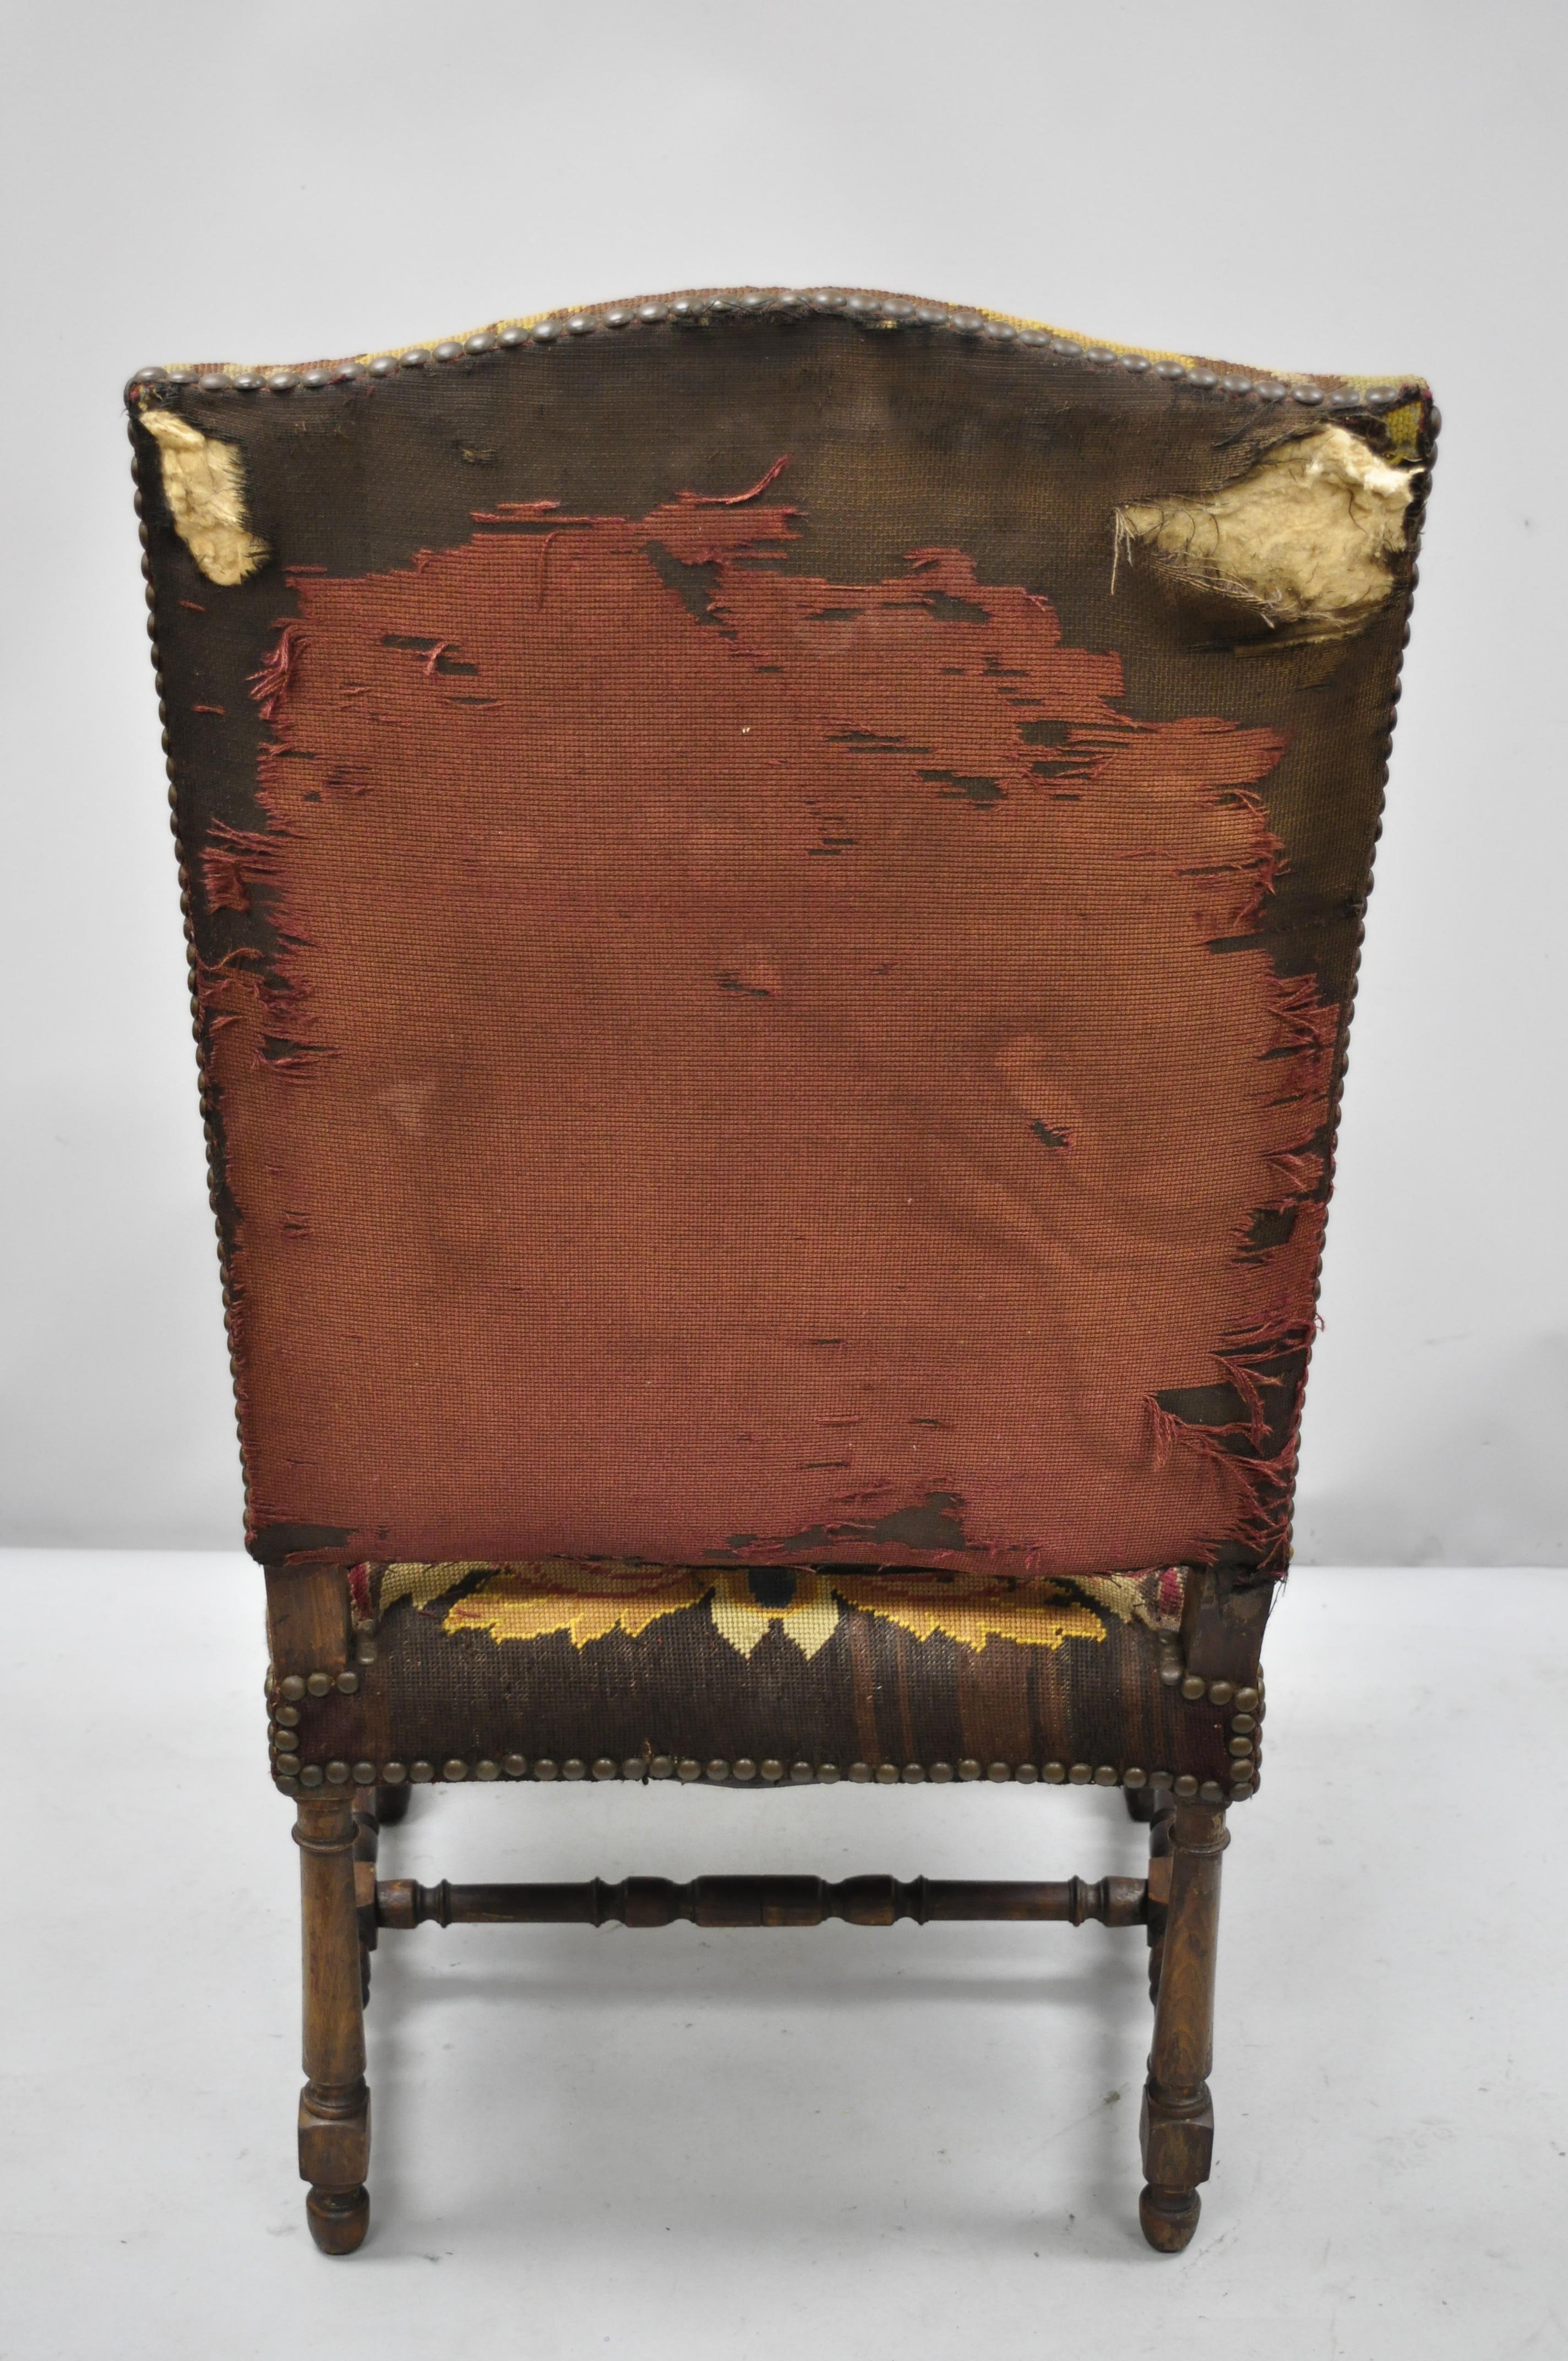 19th Century French Renaissance Needlepoint Upholstery Carved Walnut Throne Armchair For Sale